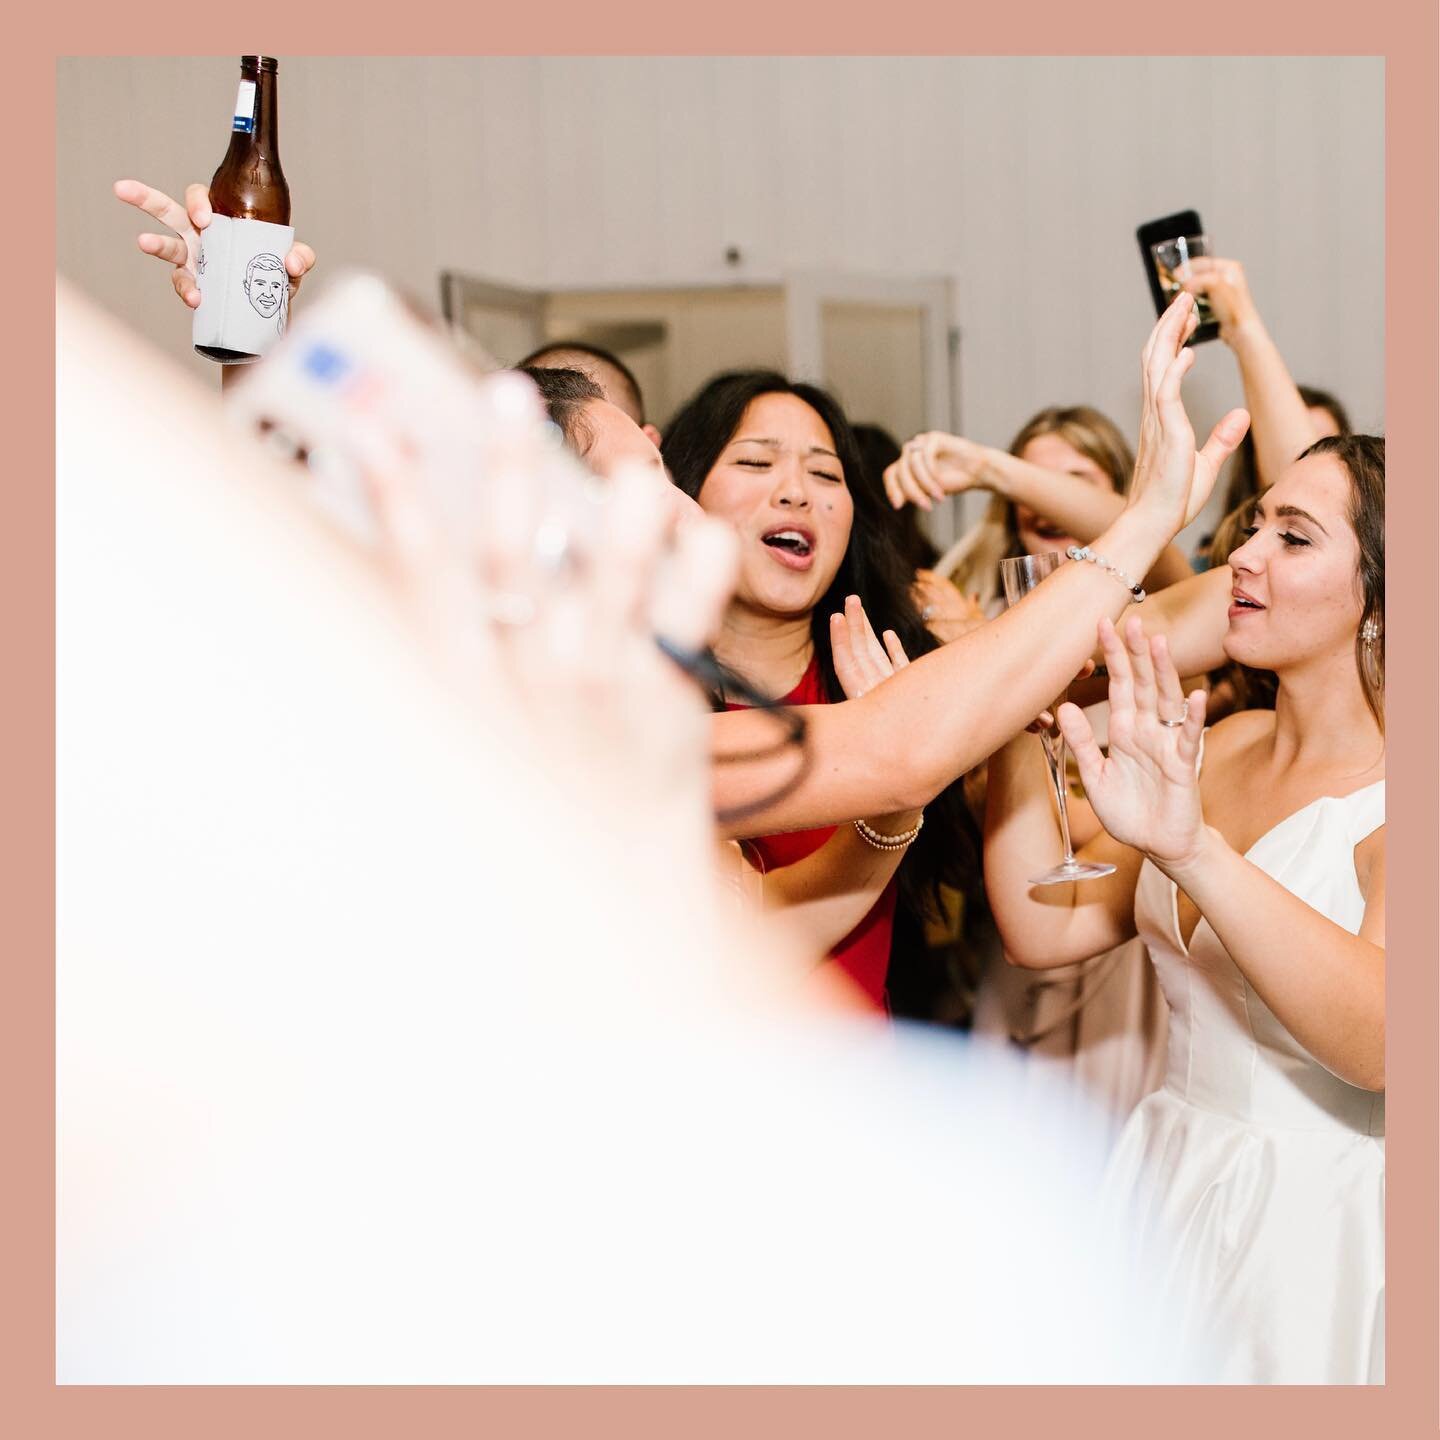 Put your can cooler in the air like you just don&rsquo;t care 😂👏✨
The most common thing I hear from couples after their wedding day is, &ldquo;Our guests loved the can coolers!! They were all gone by the end of the night!&rdquo; There&rsquo;s just 